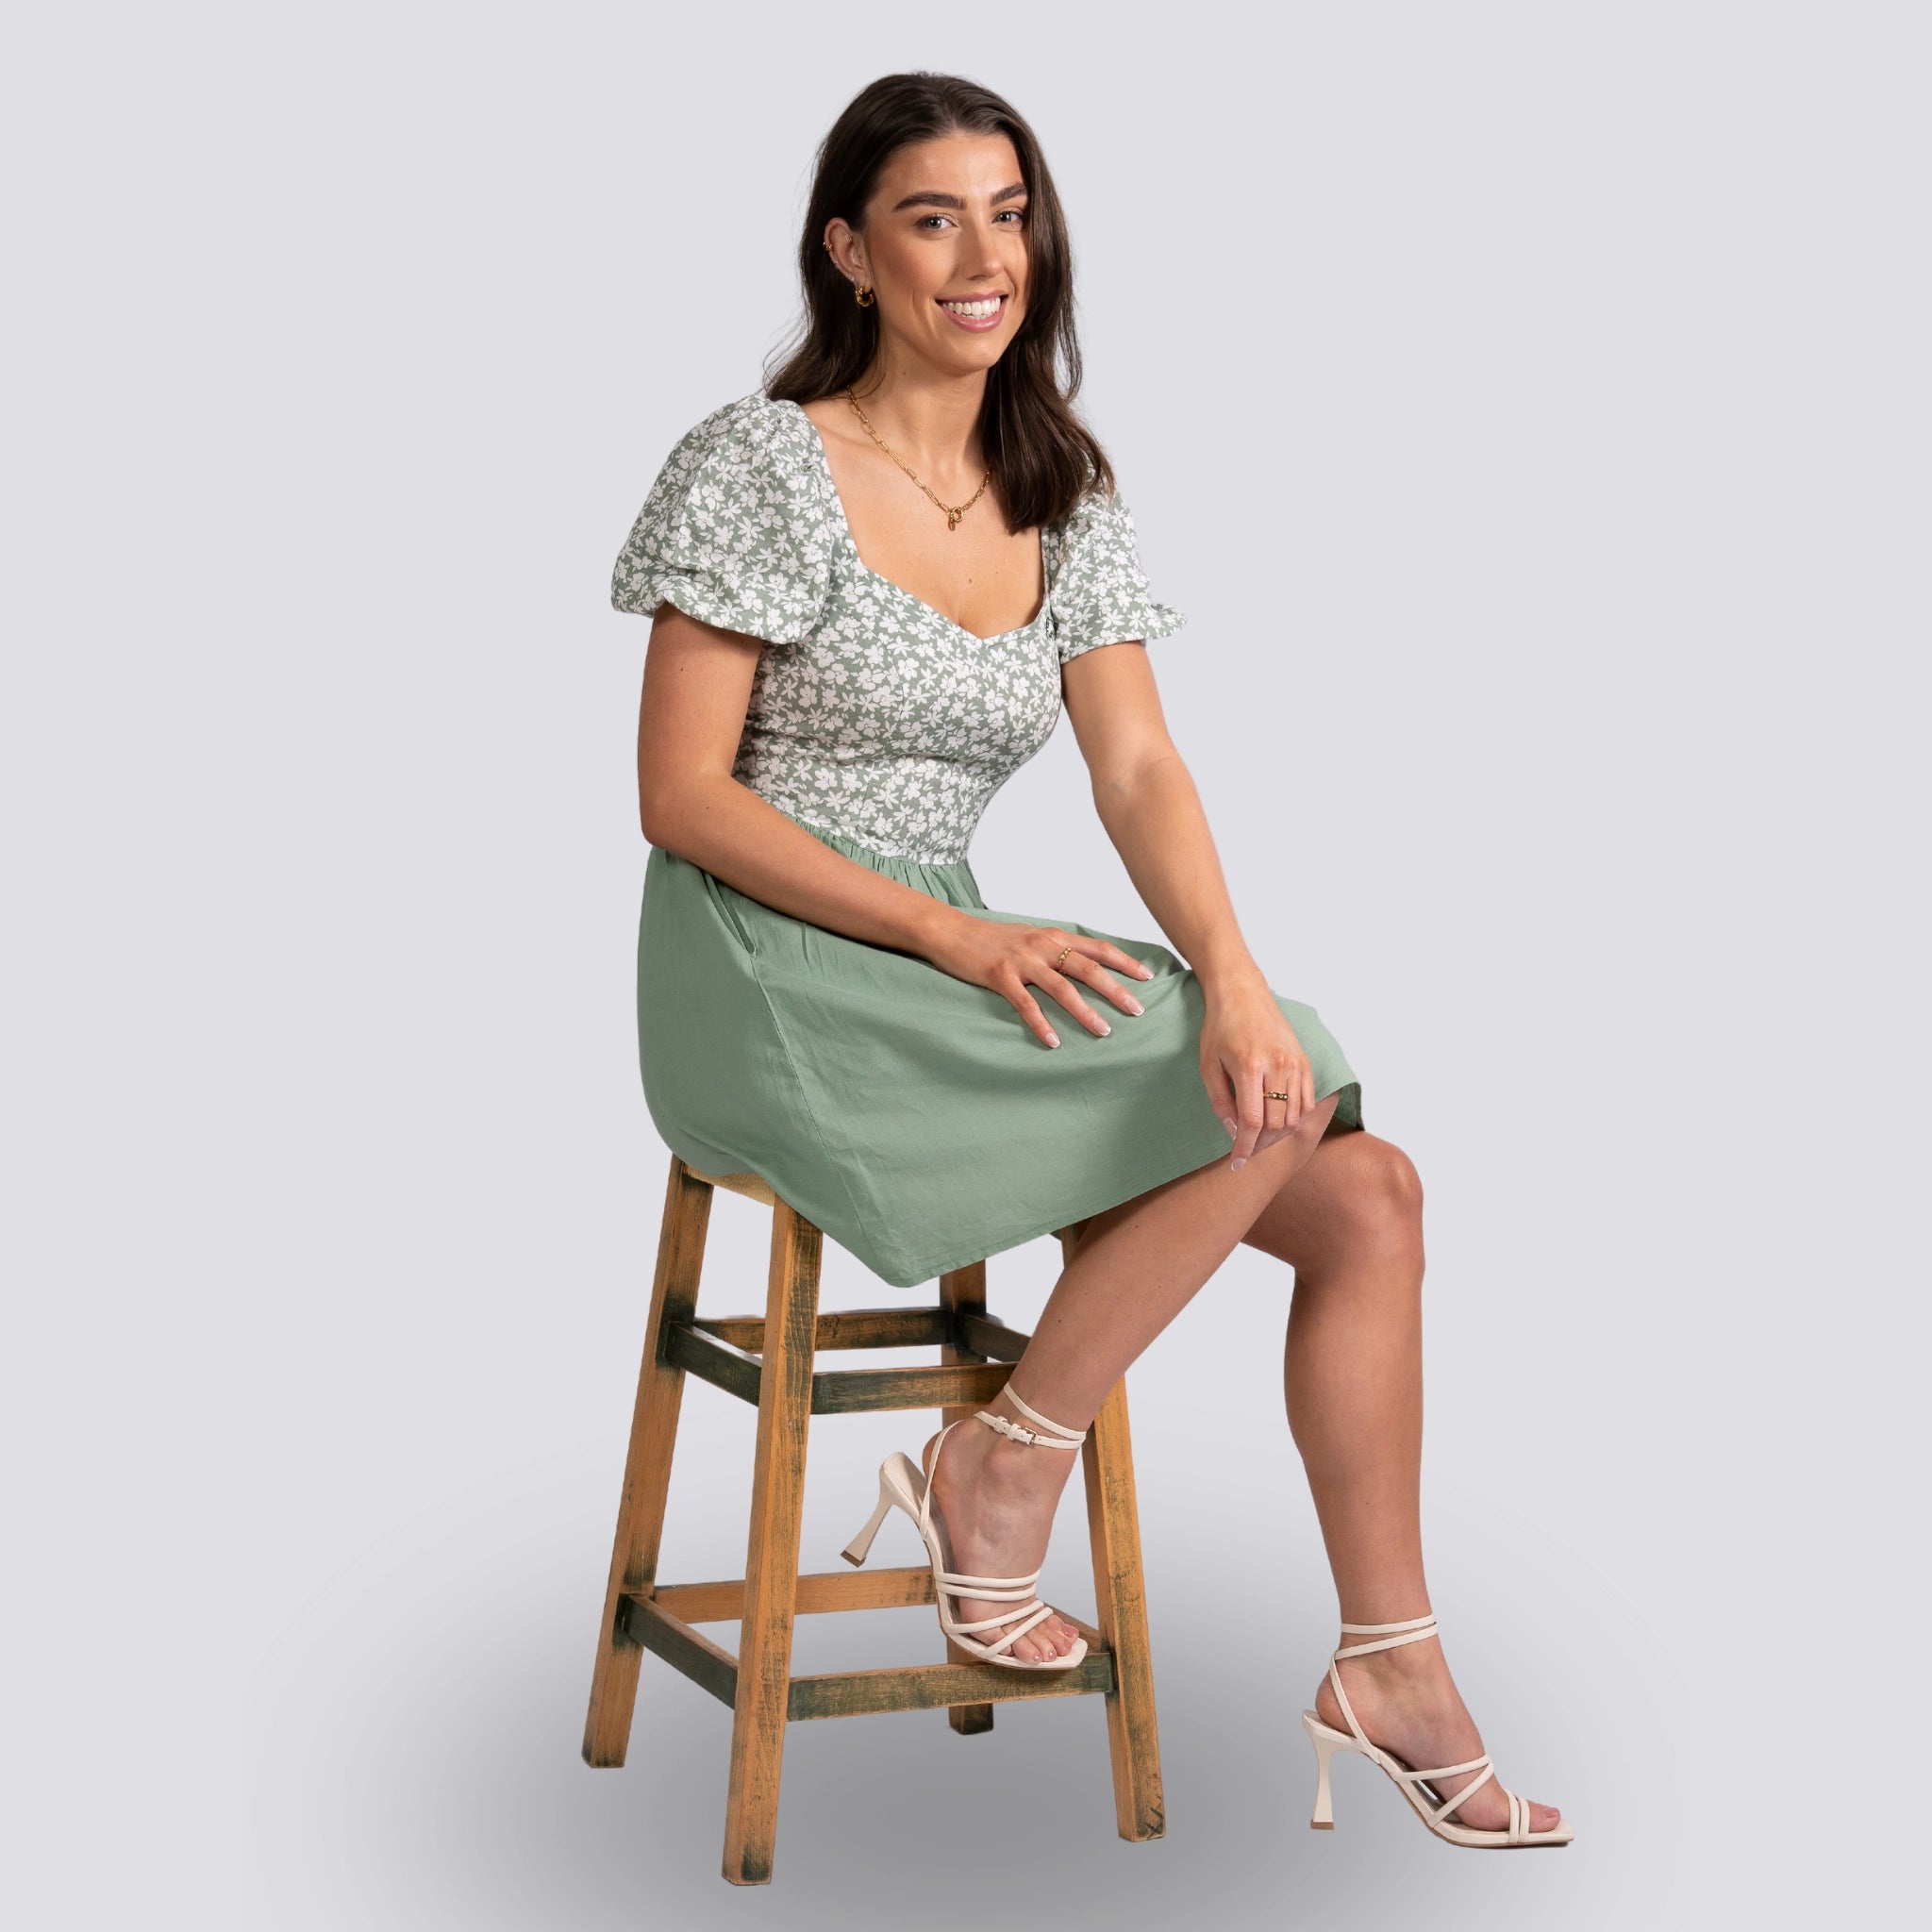 Woman in a Sirocco Blooms Green Frock Dress by Karee with a knee-length hemline and floral top sitting on a wooden stool with a light gray background.